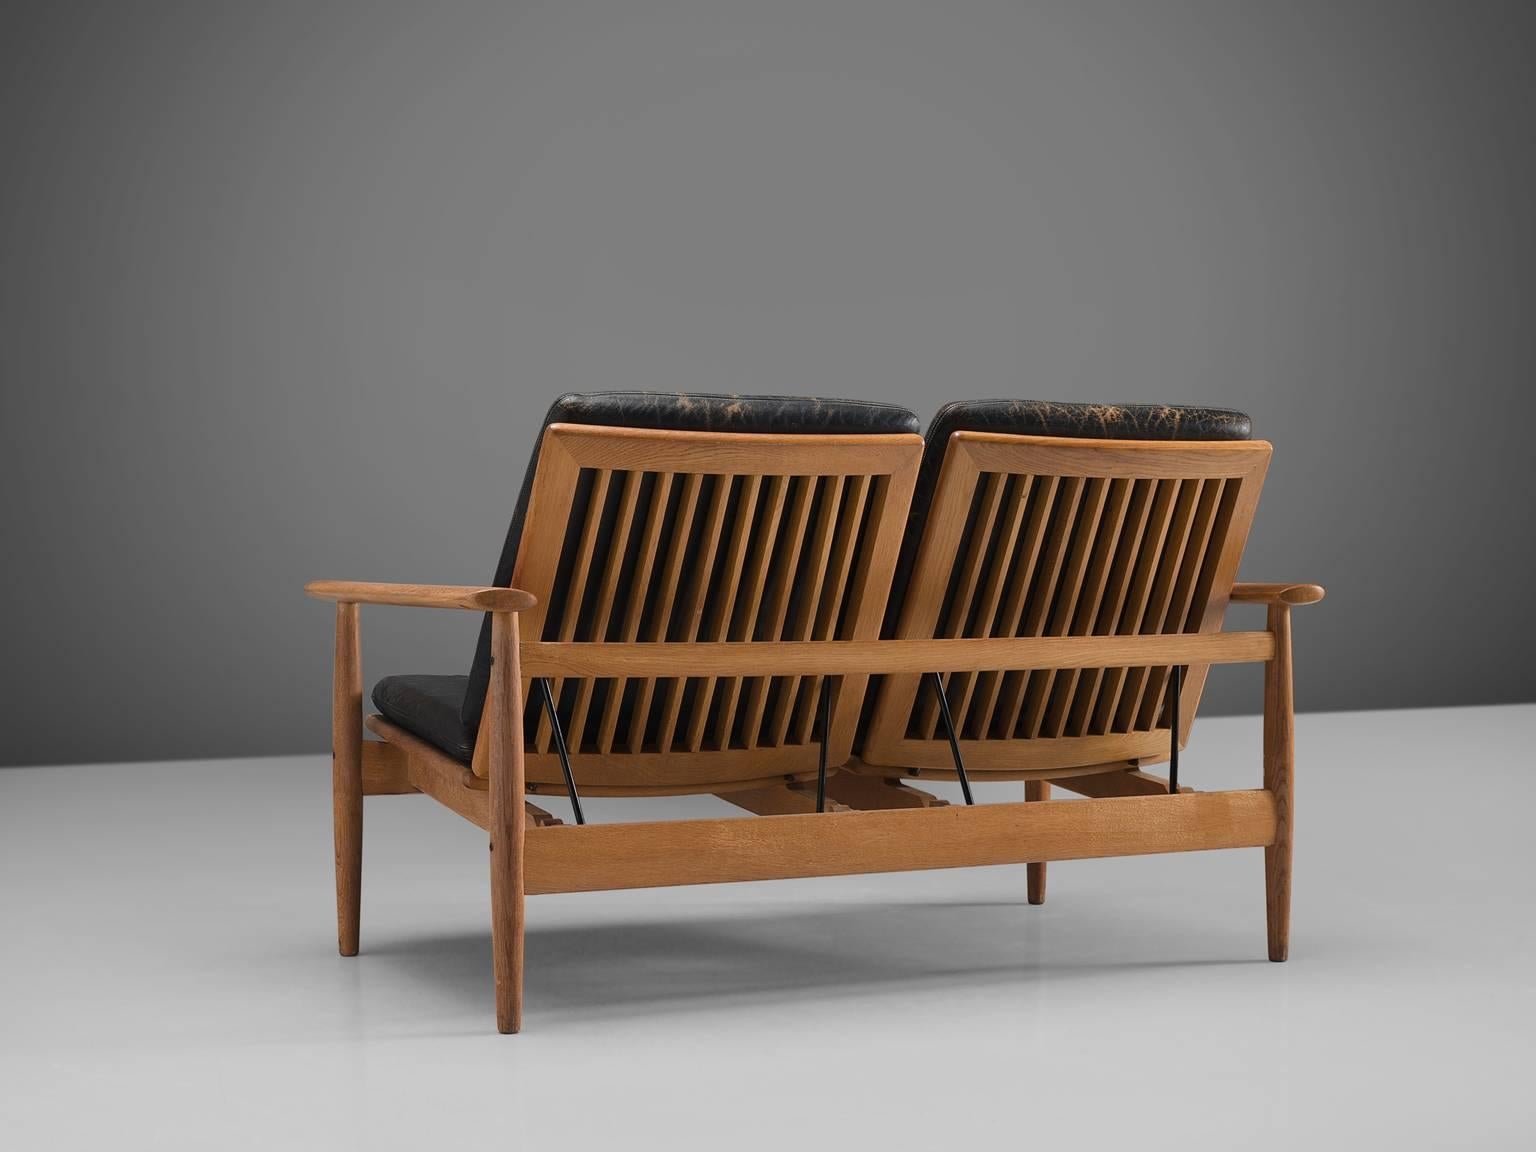 Johan Hagen, sofa, oak, black leather, Denmark, 1960s

This little sofa is executed in oak and upholstered with black leather. One of the main features of this modest piece is its slatted back. The back is adjustable and can therefore be put in any